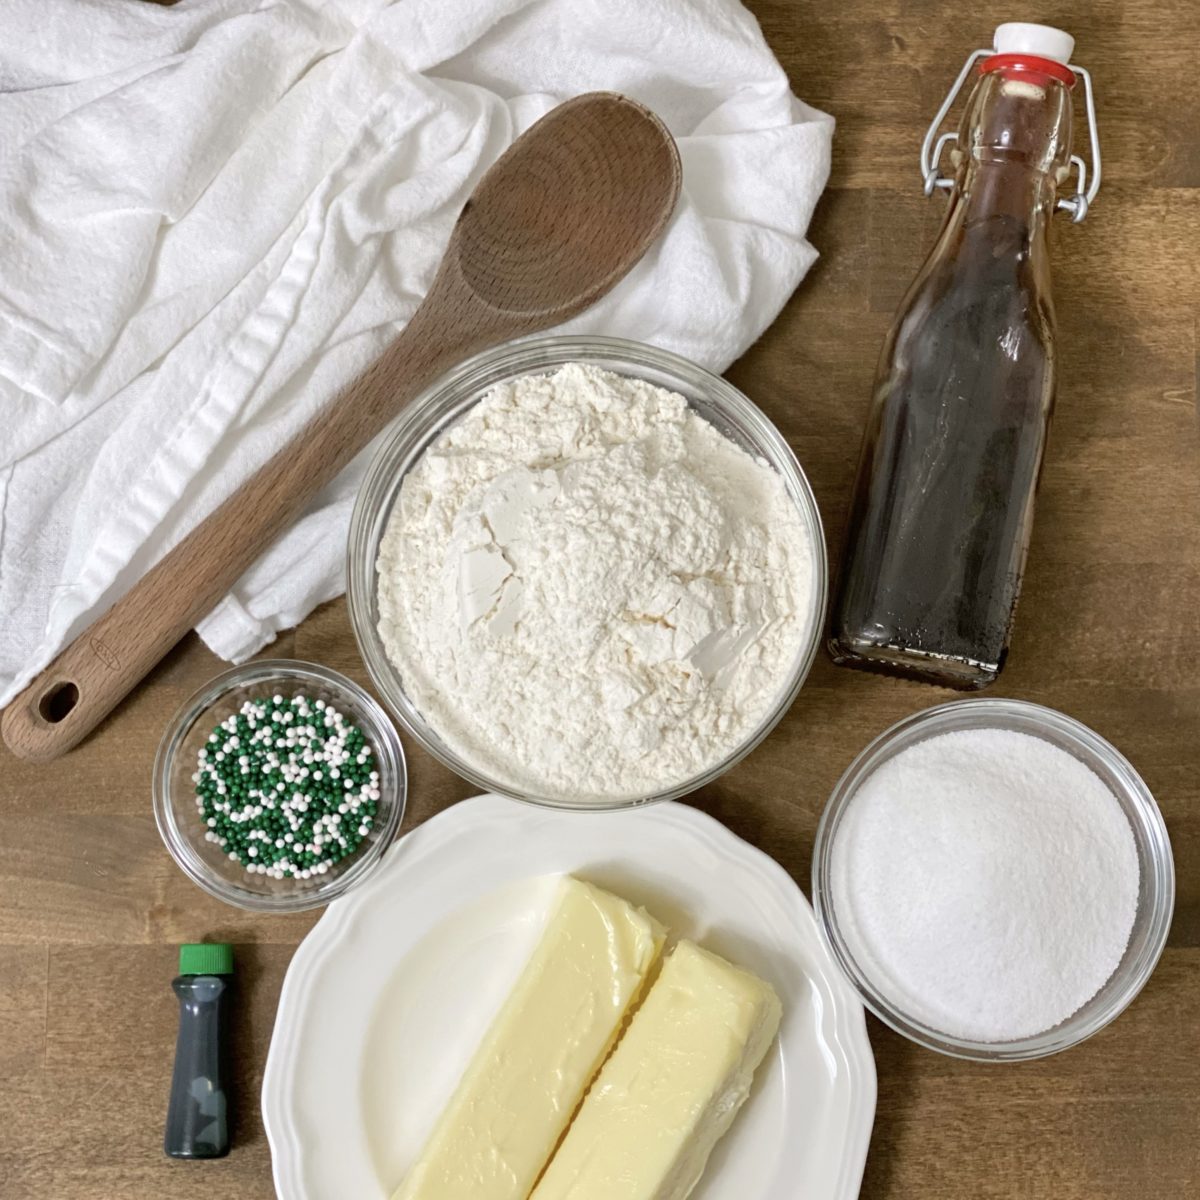 Ingredients for St. Patrick's Day shortbread bites including butter, sugar, flour, vanilla extract, sprinkles and food coloring.